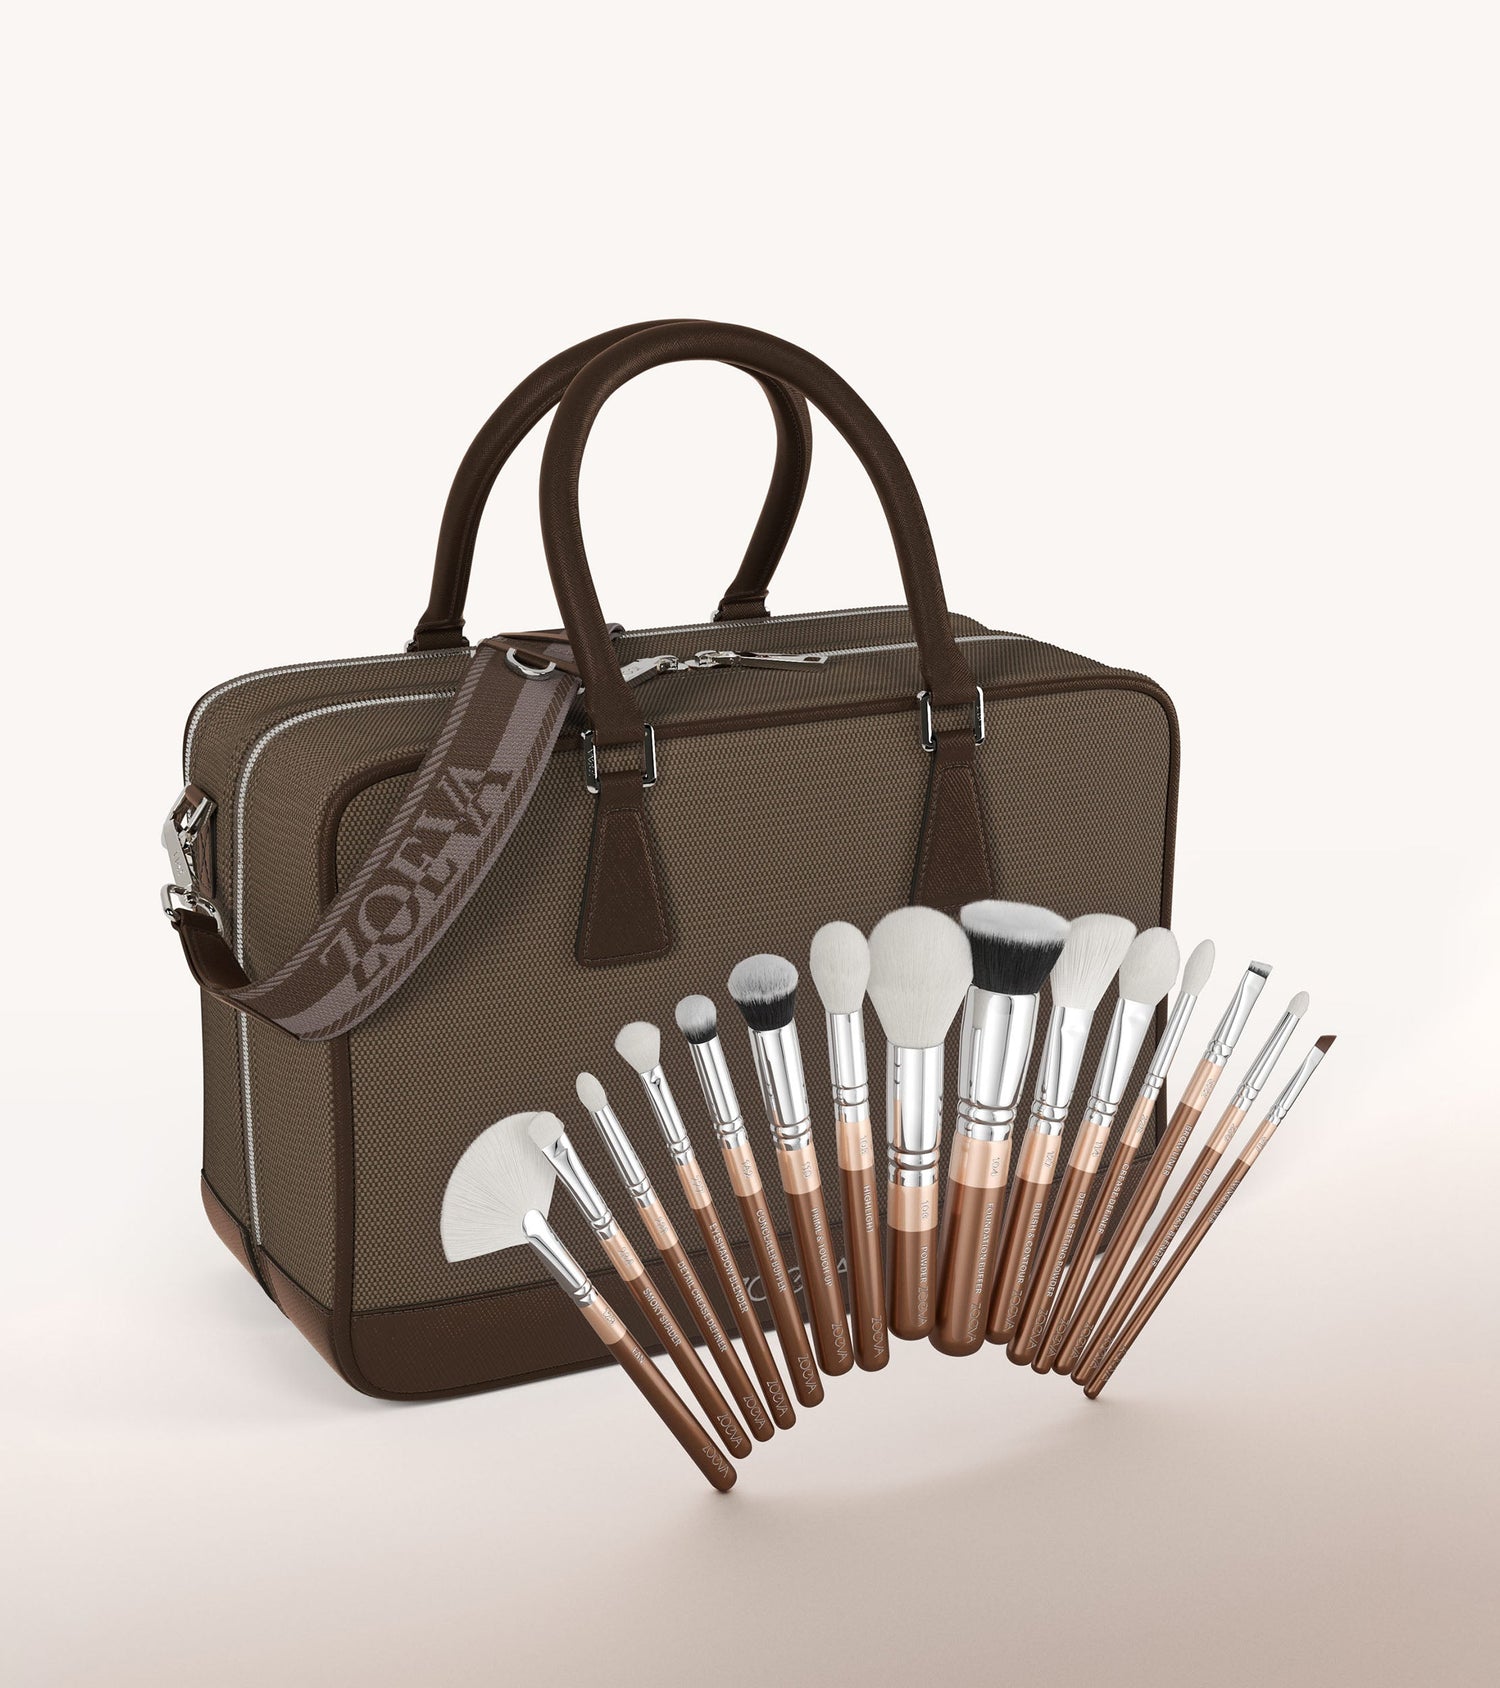 The Zoe Bag & The Artists Brush Set (Light Chocolate) Main Image featured